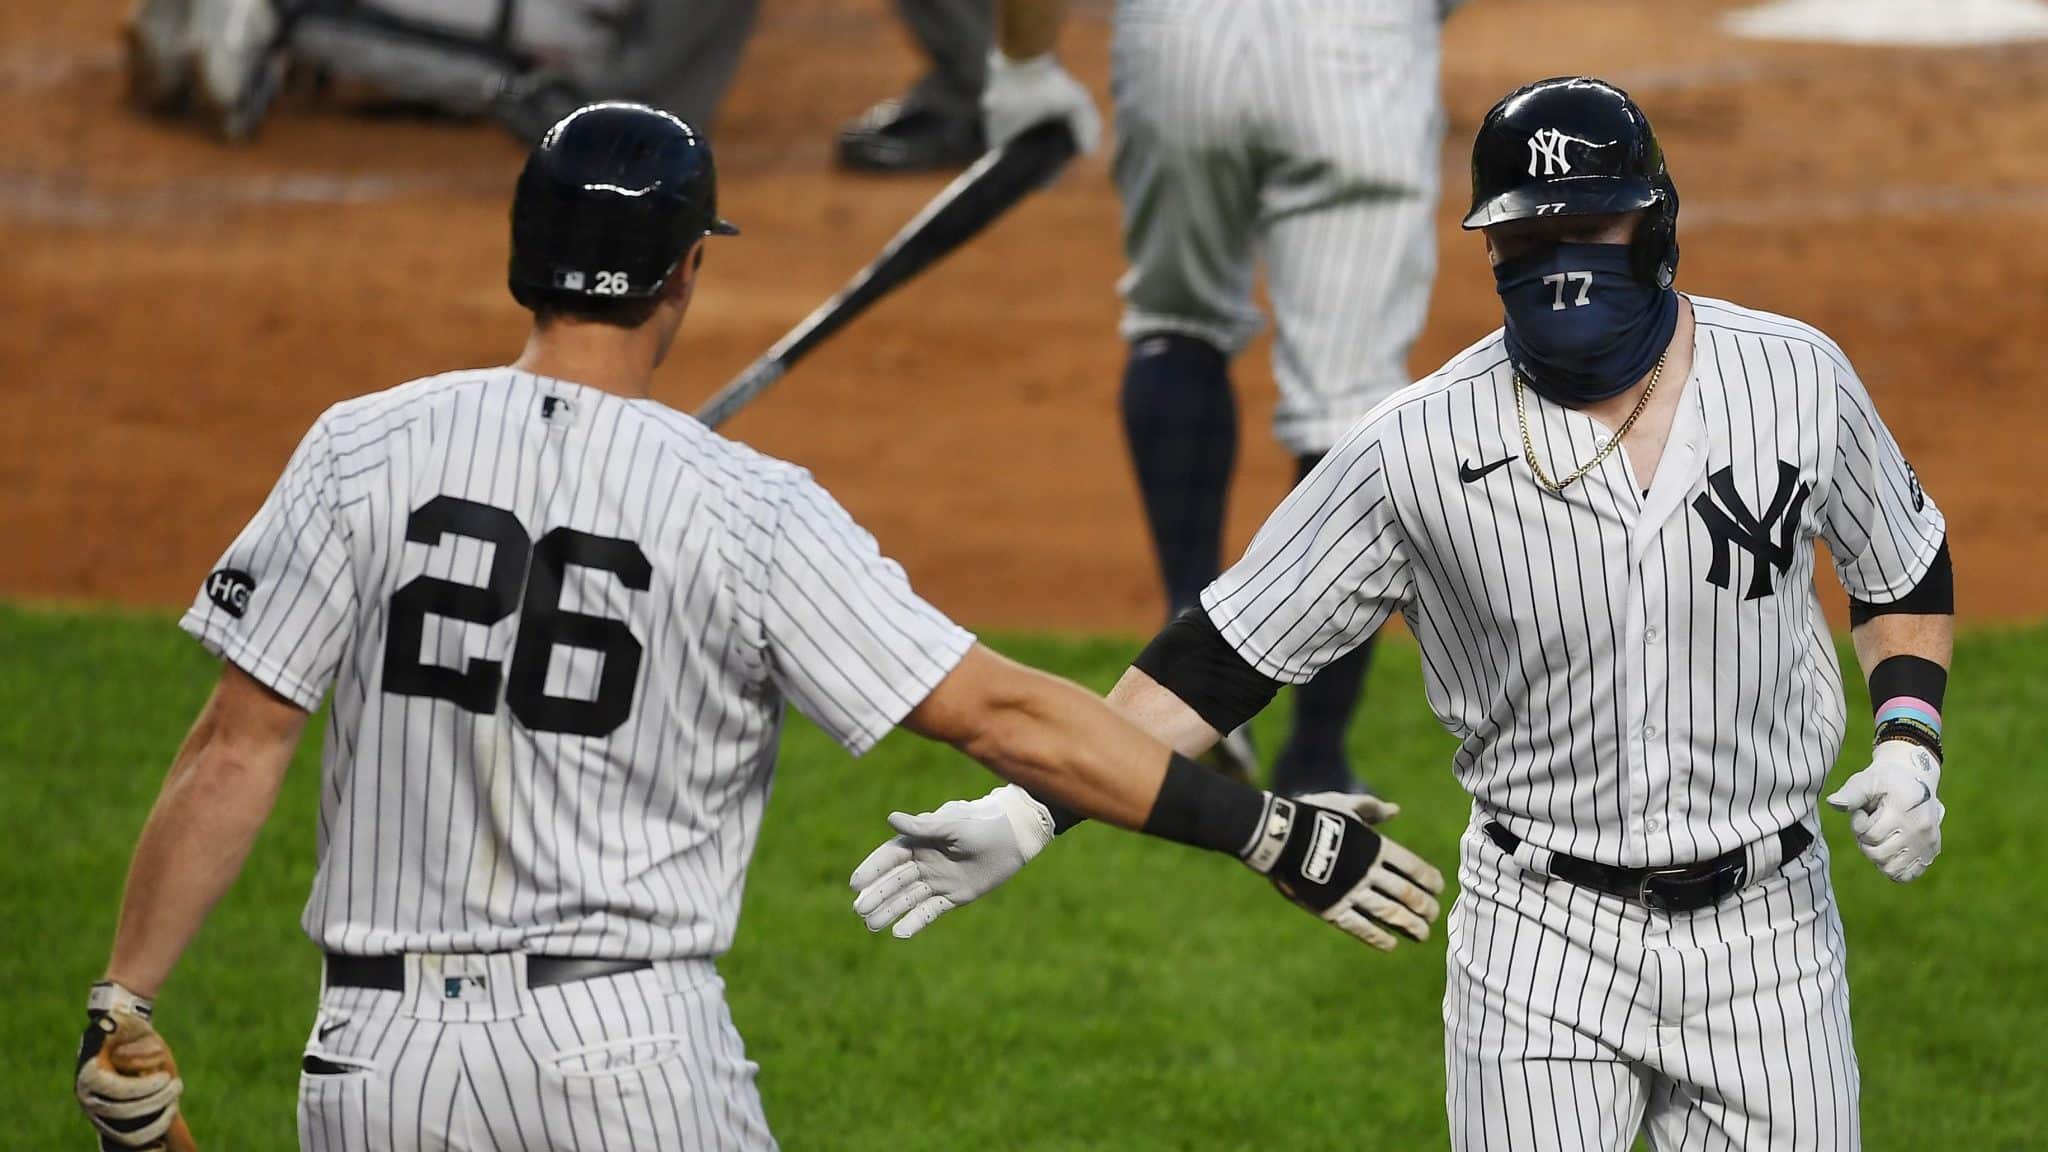 NEW YORK, NEW YORK - AUGUST 12: Clint Frazier #77 of the New York Yankees slaps gloved hands with DJ LeMahieu #26 after Frazier's home run in the second inning against the Atlanta Braves at Yankee Stadium on August 12, 2020 in the Bronx borough of New York City.